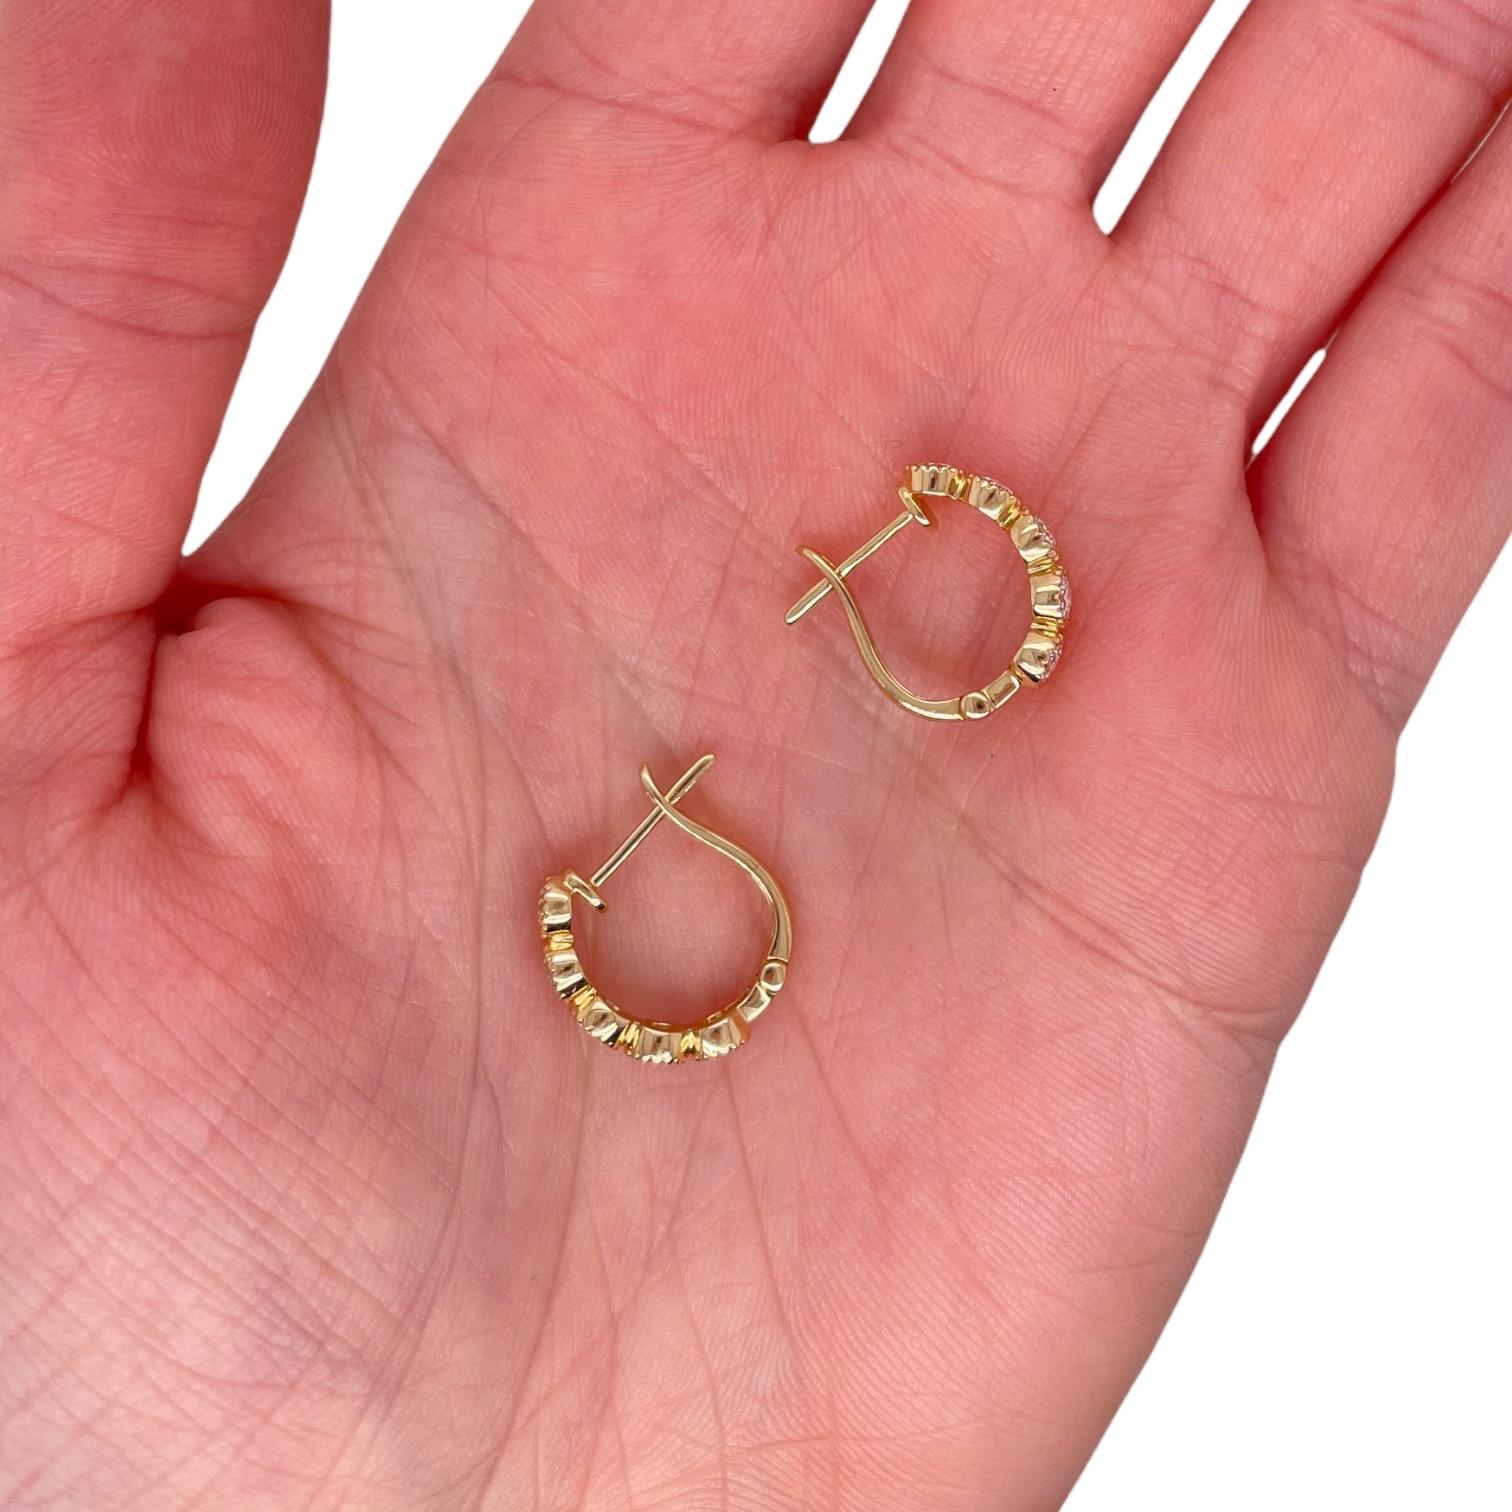 Earring contains 10 round brilliant diamonds totaling 0.72cts. 
Diamonds are G in color and SI1 in clarity, excellent cut. 
Hoop is half an inch in diameter and contains a post back closure.

All of our pieces are packaged carefully and accompanied